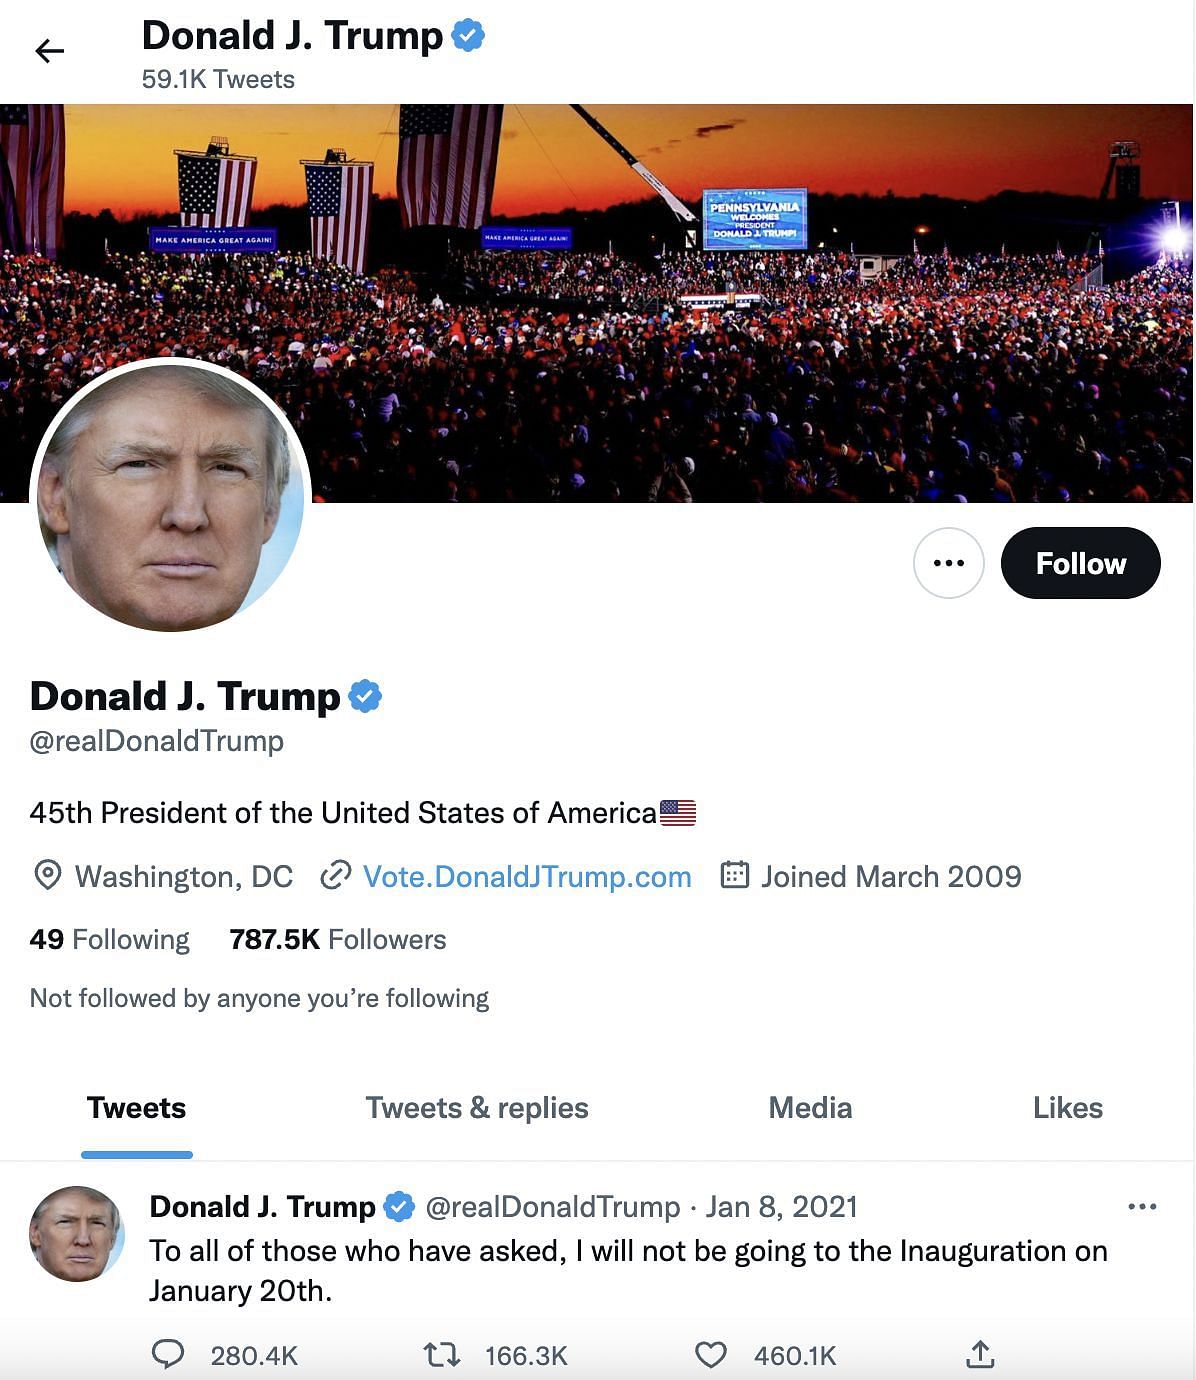 Trump&#039;s account makes a comeback on Twitter, as Elon Musk announced that the former President&#039;s account will be reinstated. (Image via Twitter)